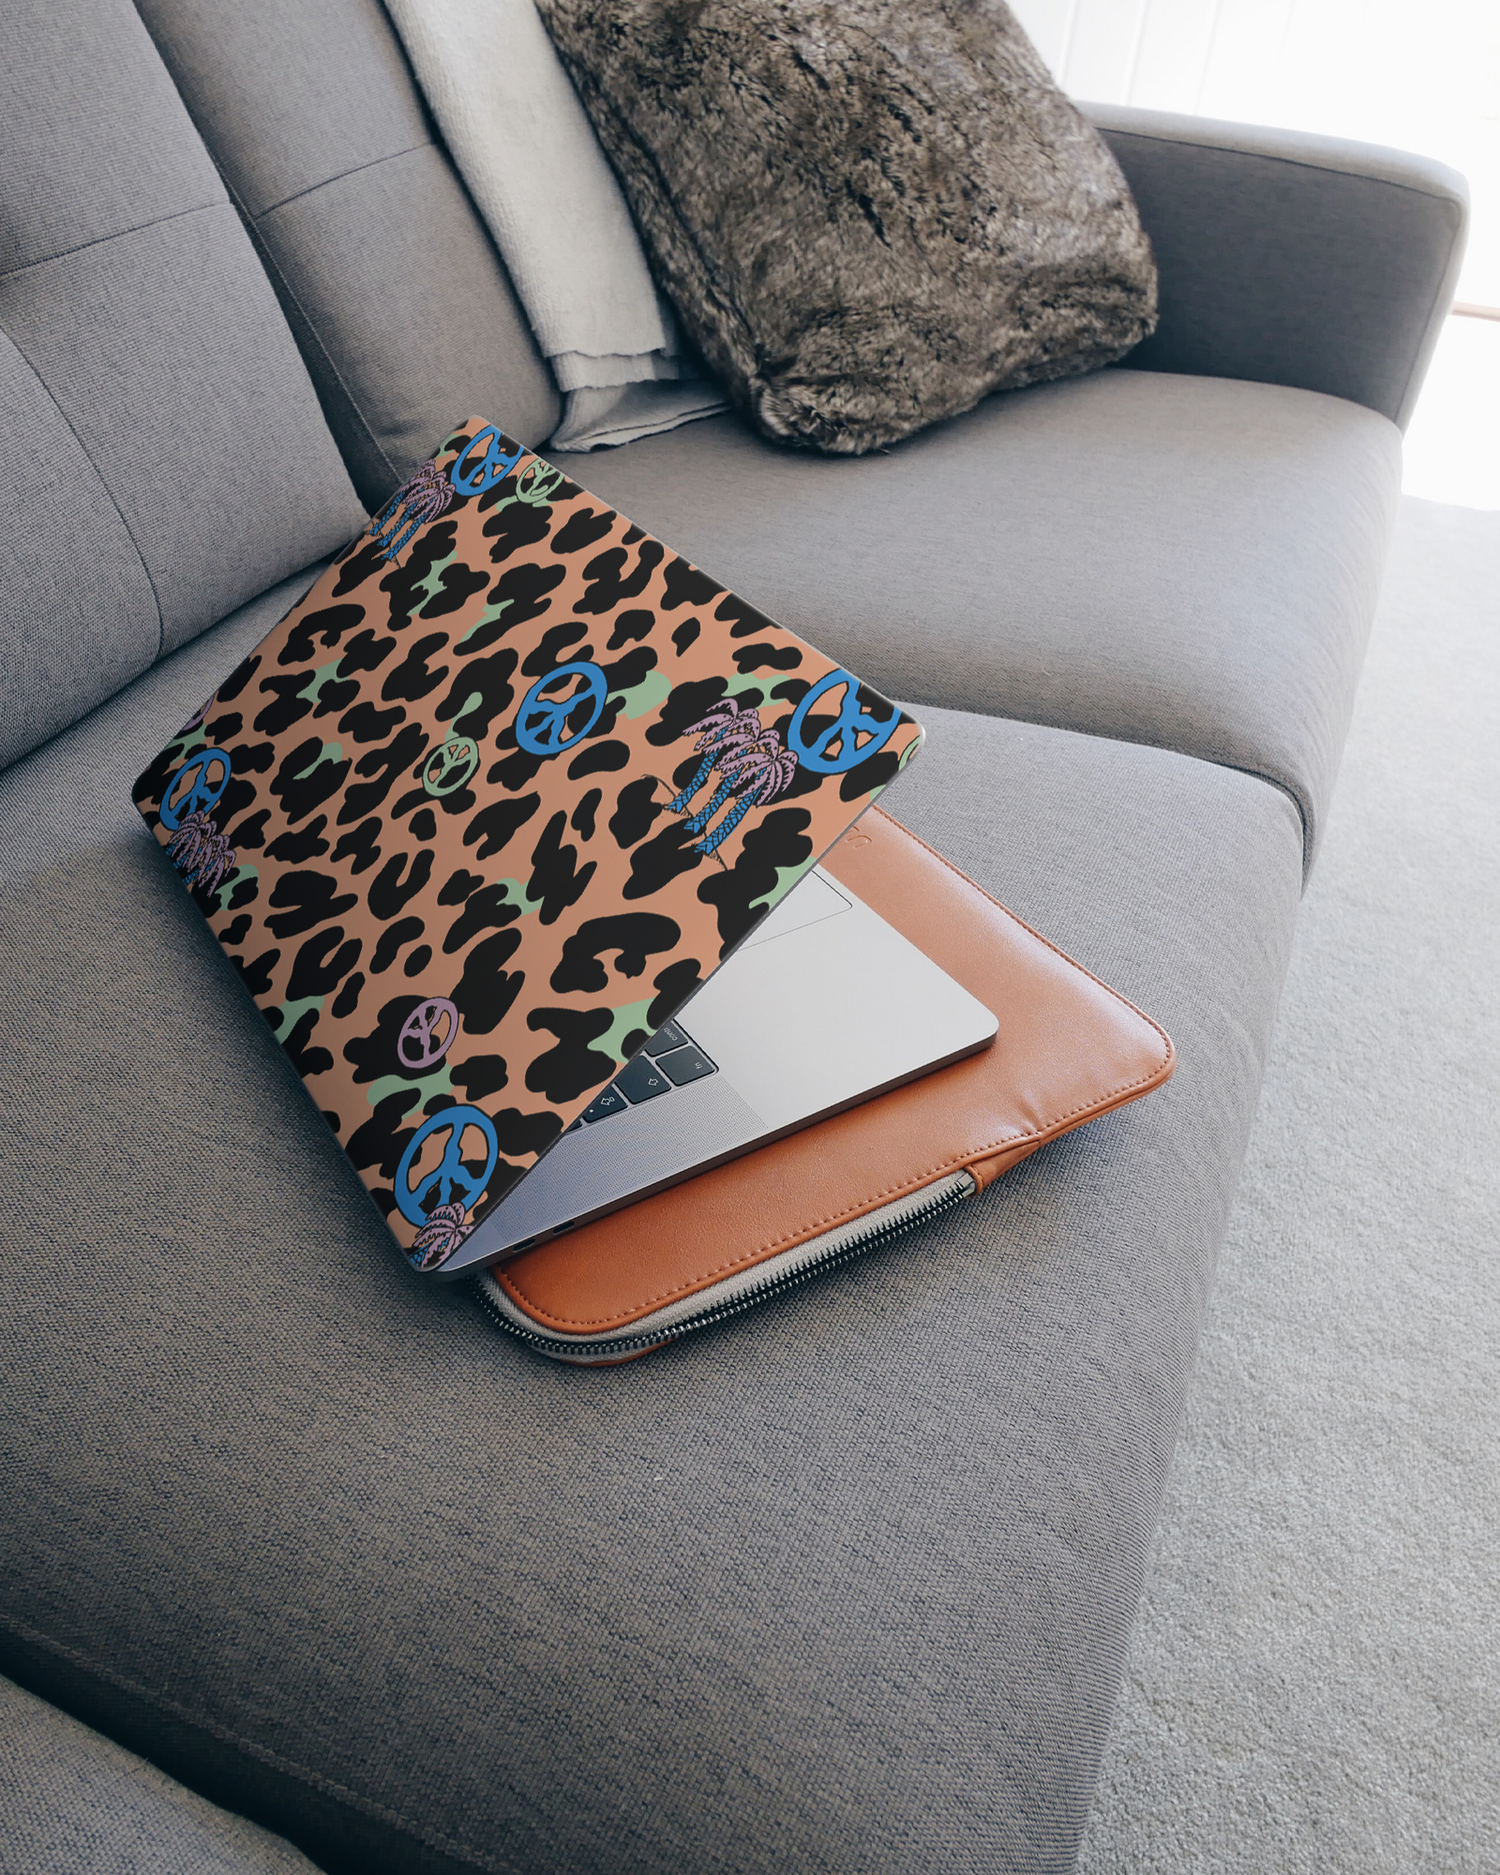 Leopard Peace Palms Laptop Skin for 15 inch Apple MacBooks on a couch